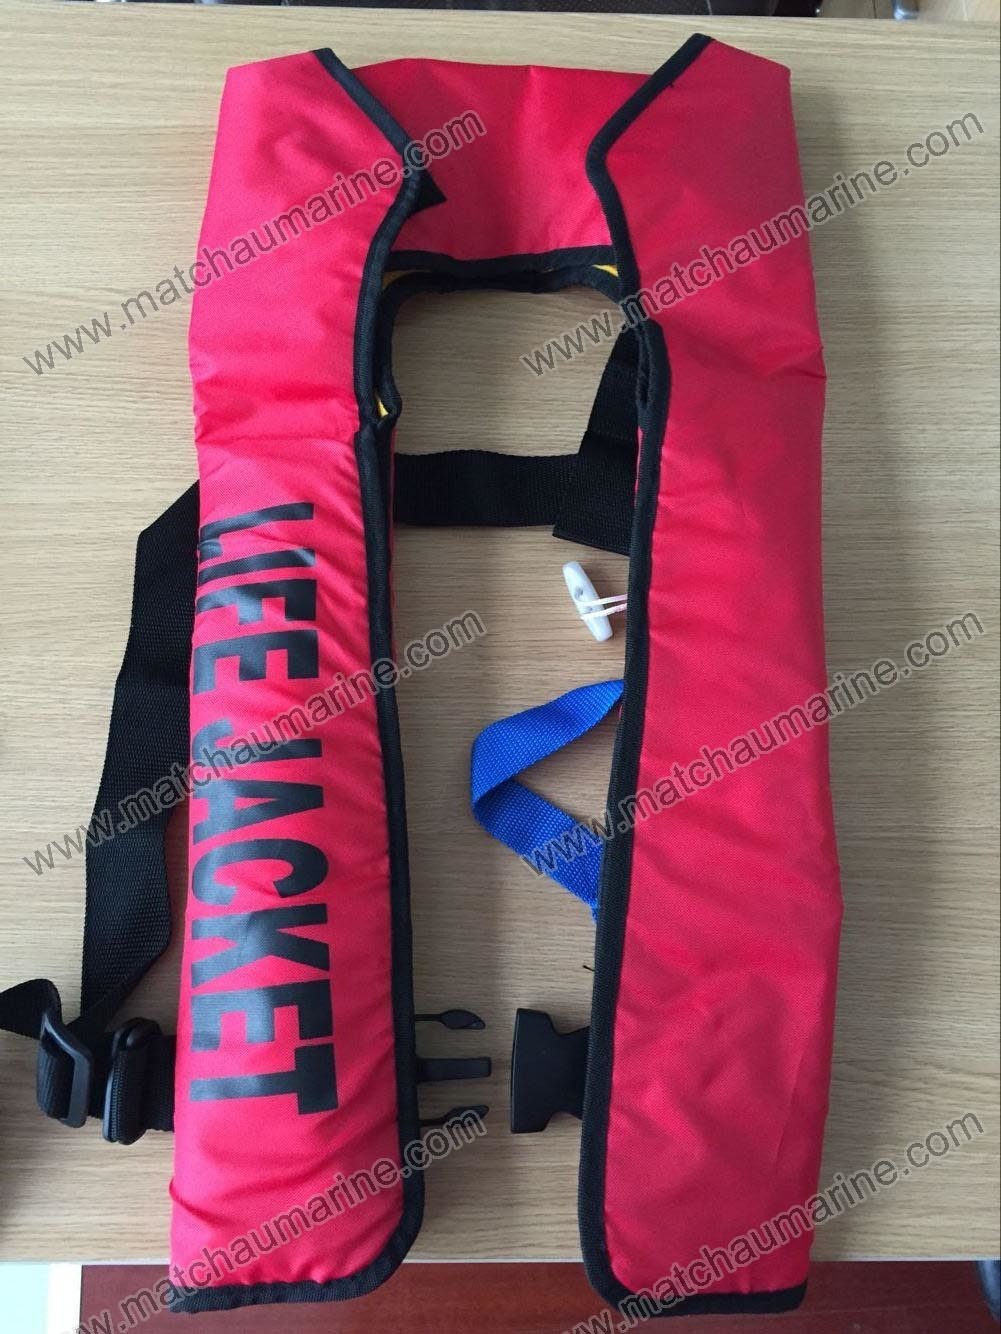 Solas Approved Auto Inflatable Lifejacket